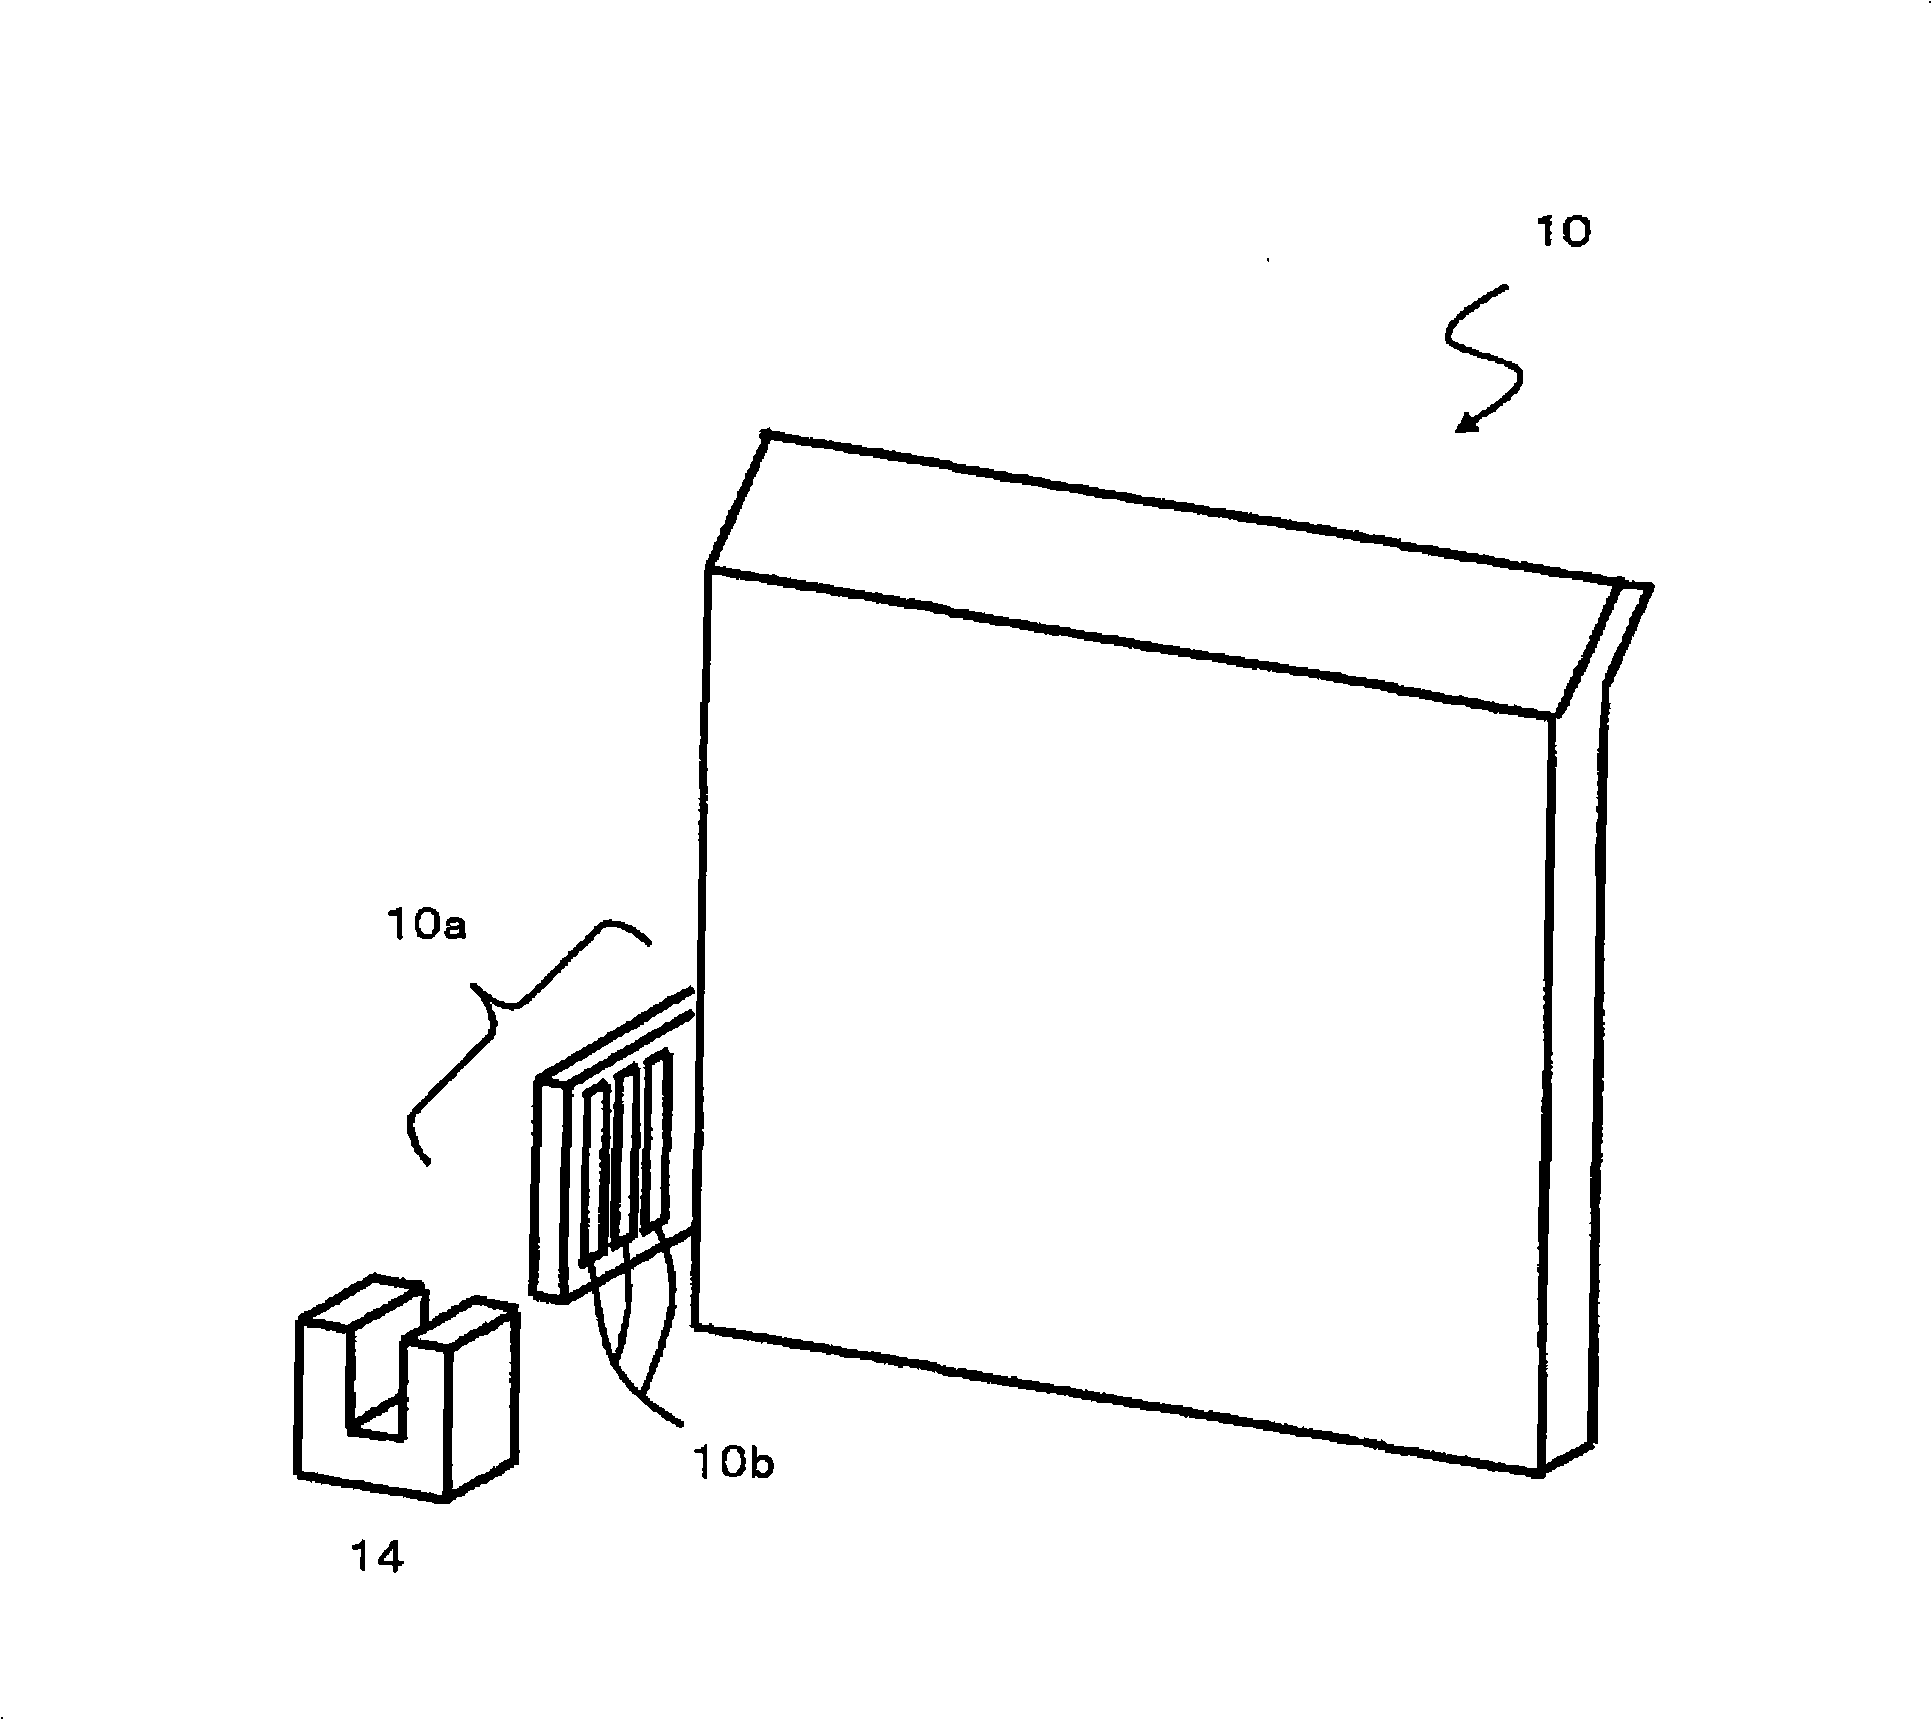 Bank paper processing device